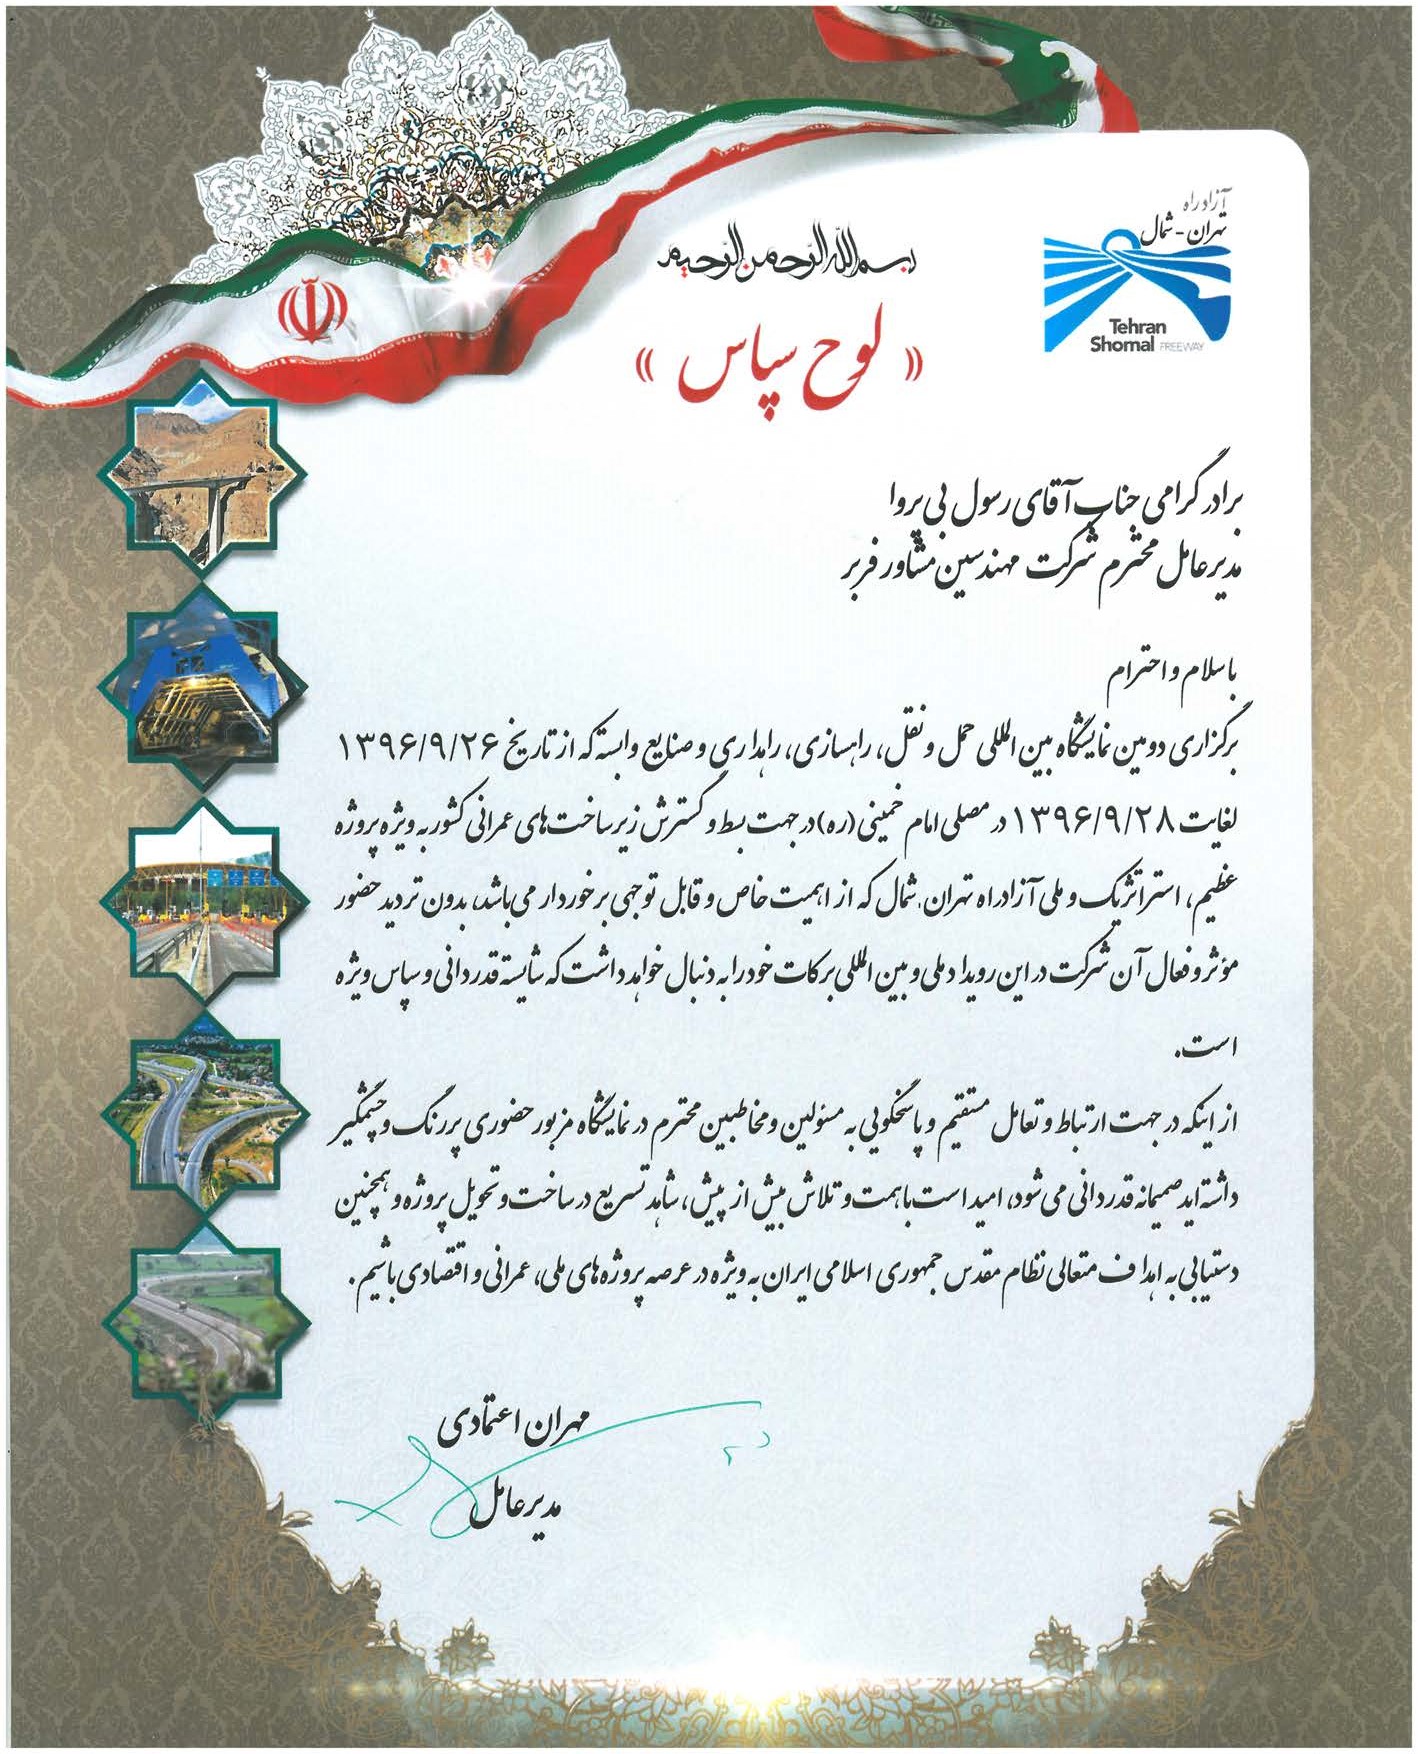 Tehran Freeway Project, North - Certificate of Appreciation for the International Exhibition of Transport, Roads, Roads and Related Industries